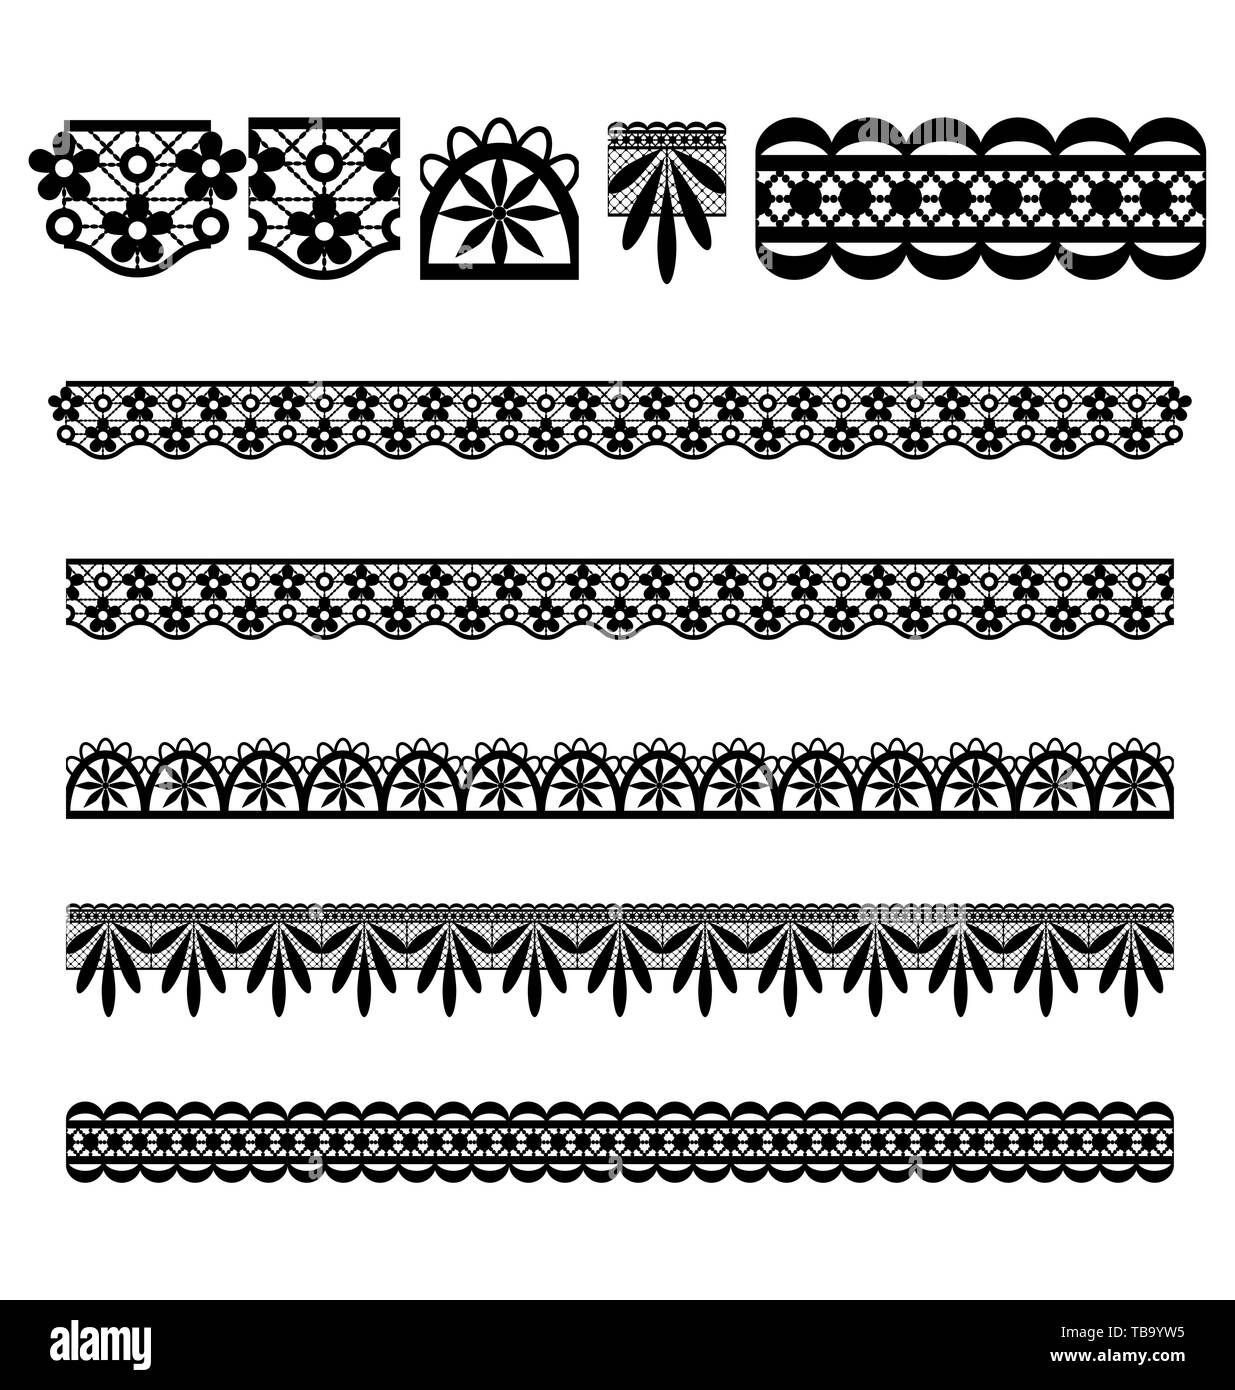 Lace trim Stock Vector Images - Alamy